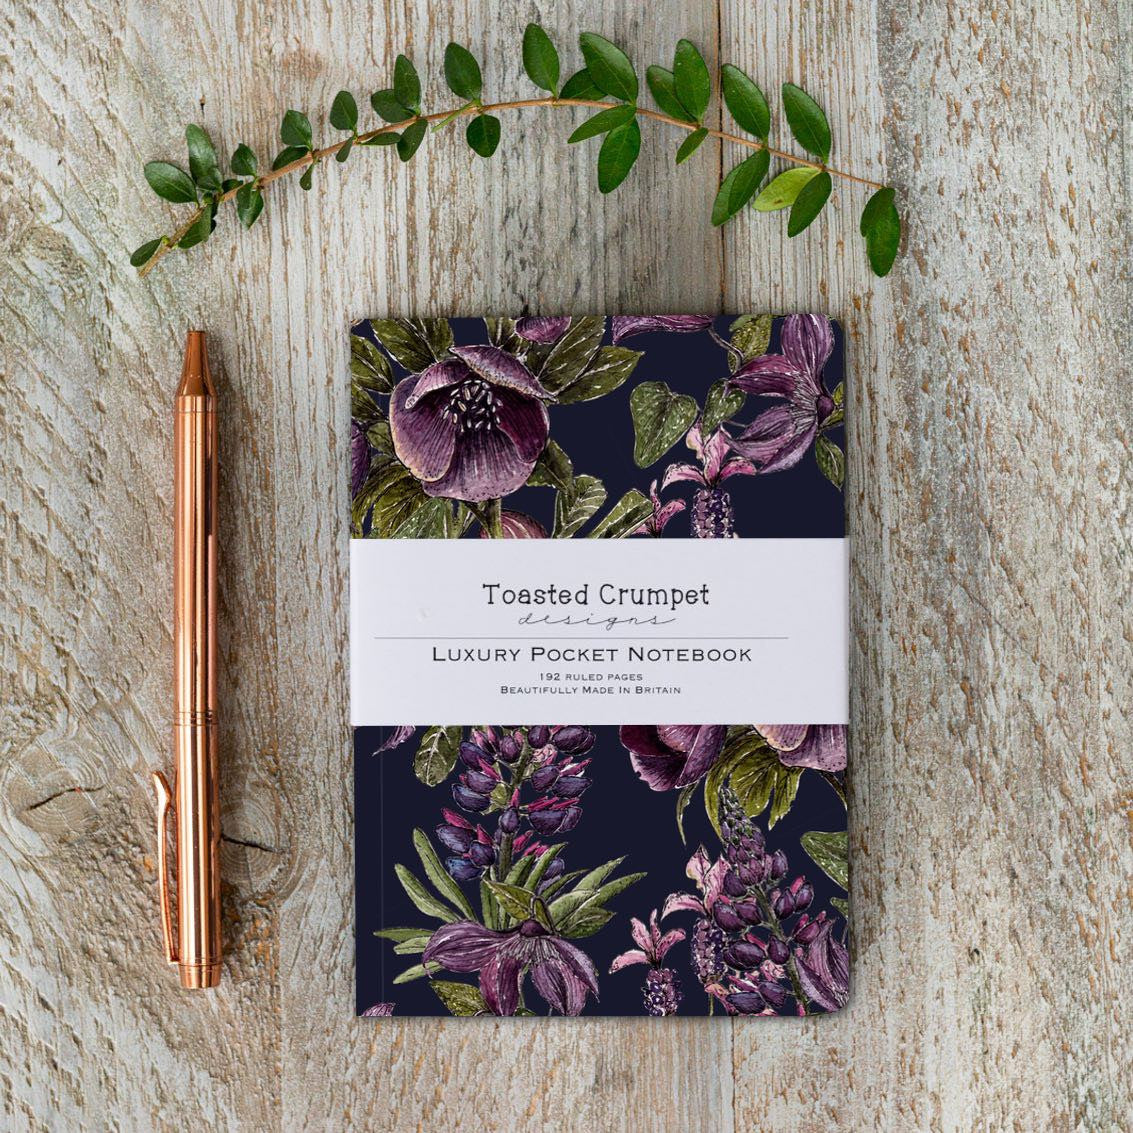 Mulberry Noir A6 Lined Pocket Notebook by Toasted Crumpet.